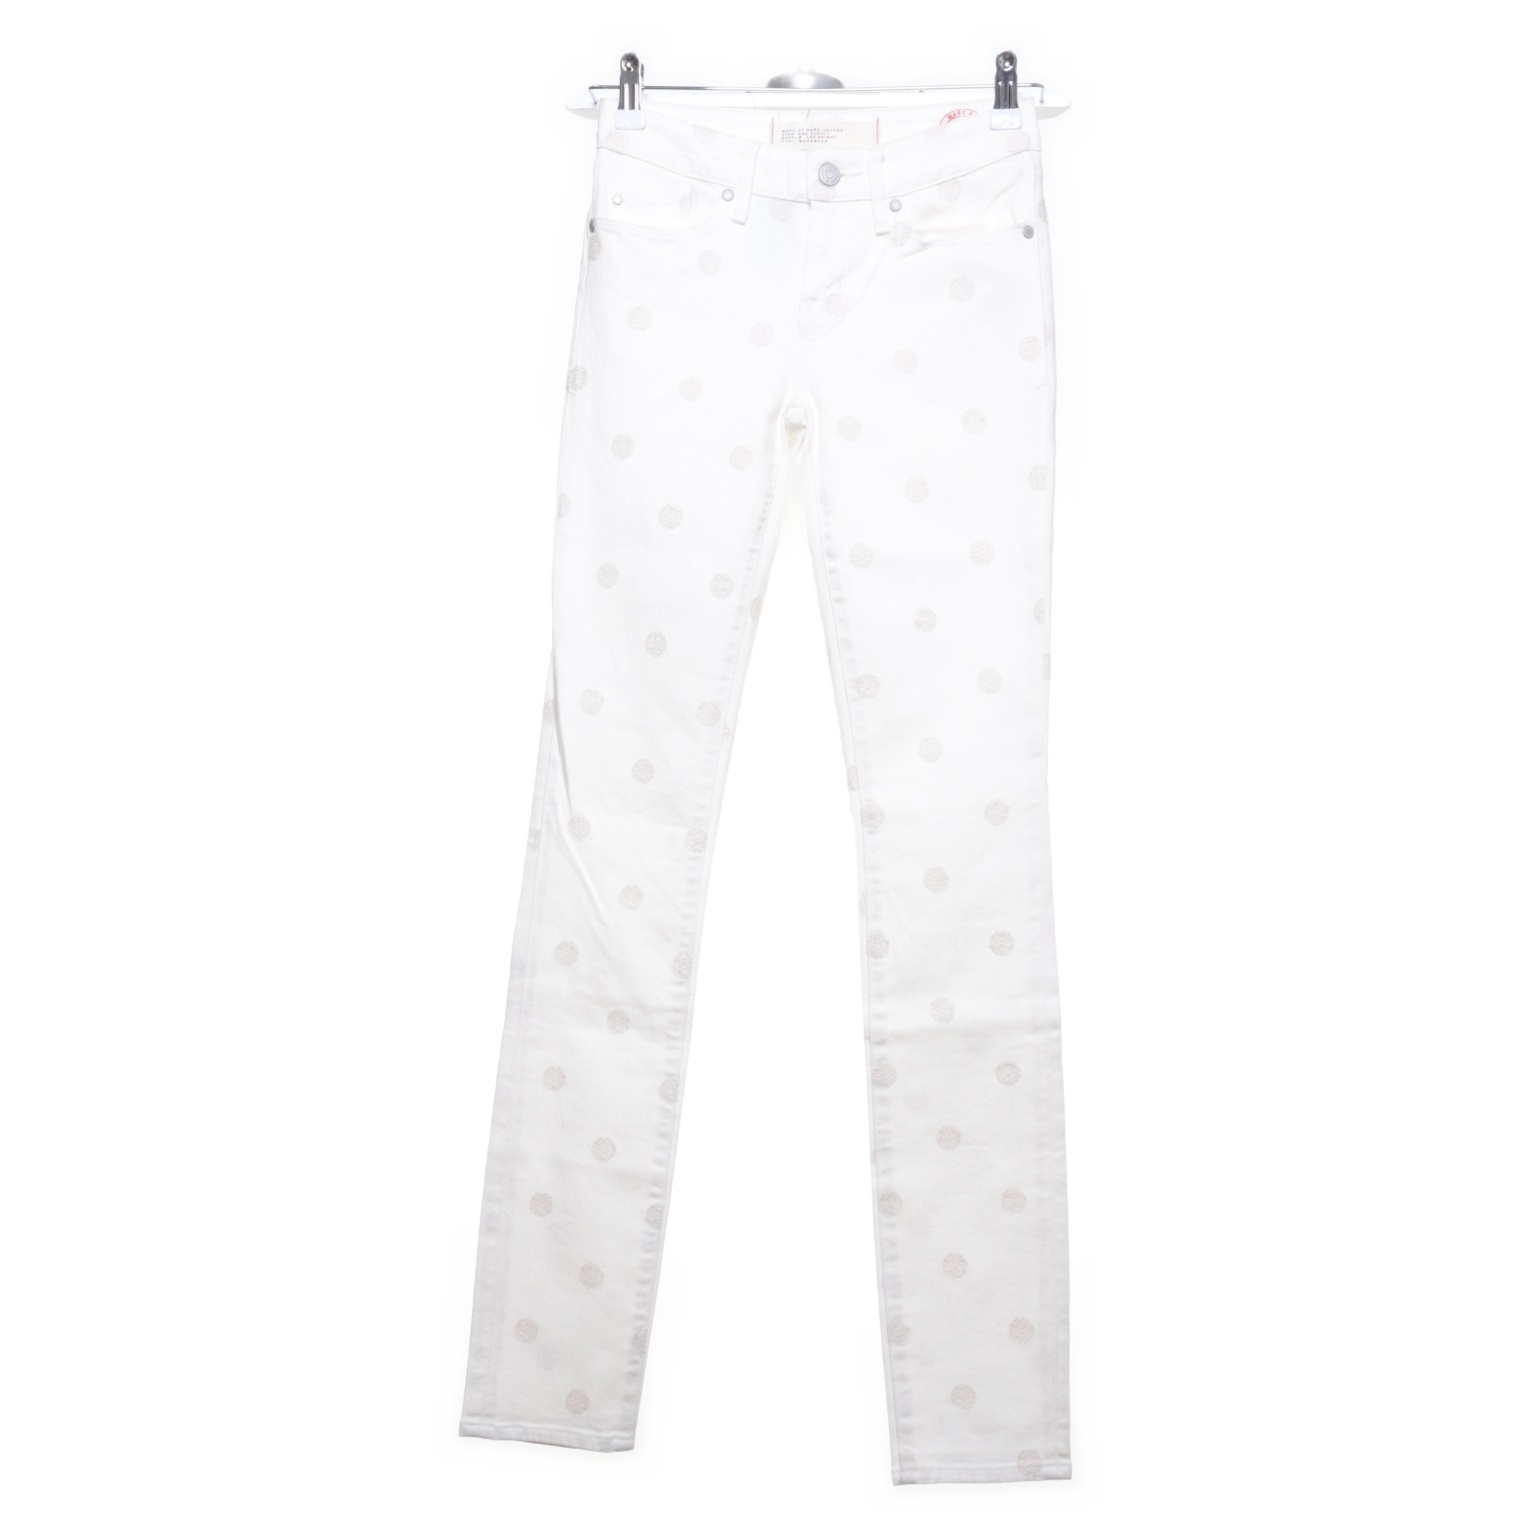 Marc by Marc Jacobs - Jeans - Größe: 24 - Off-White von Marc by Marc Jacobs